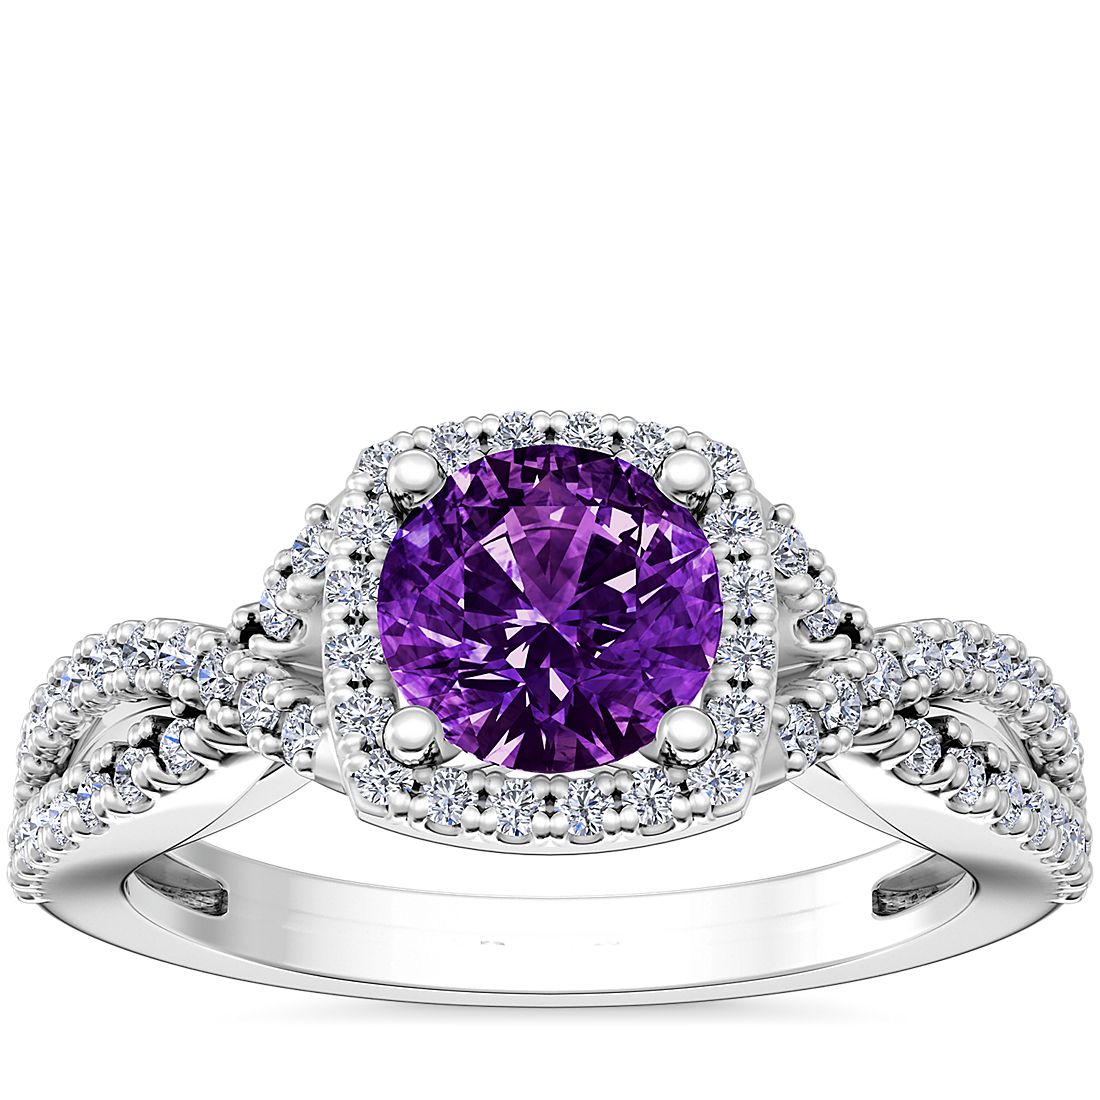 Twist Halo Diamond Engagement Ring with Round Amethyst in 14k White Gold (6.5mm)